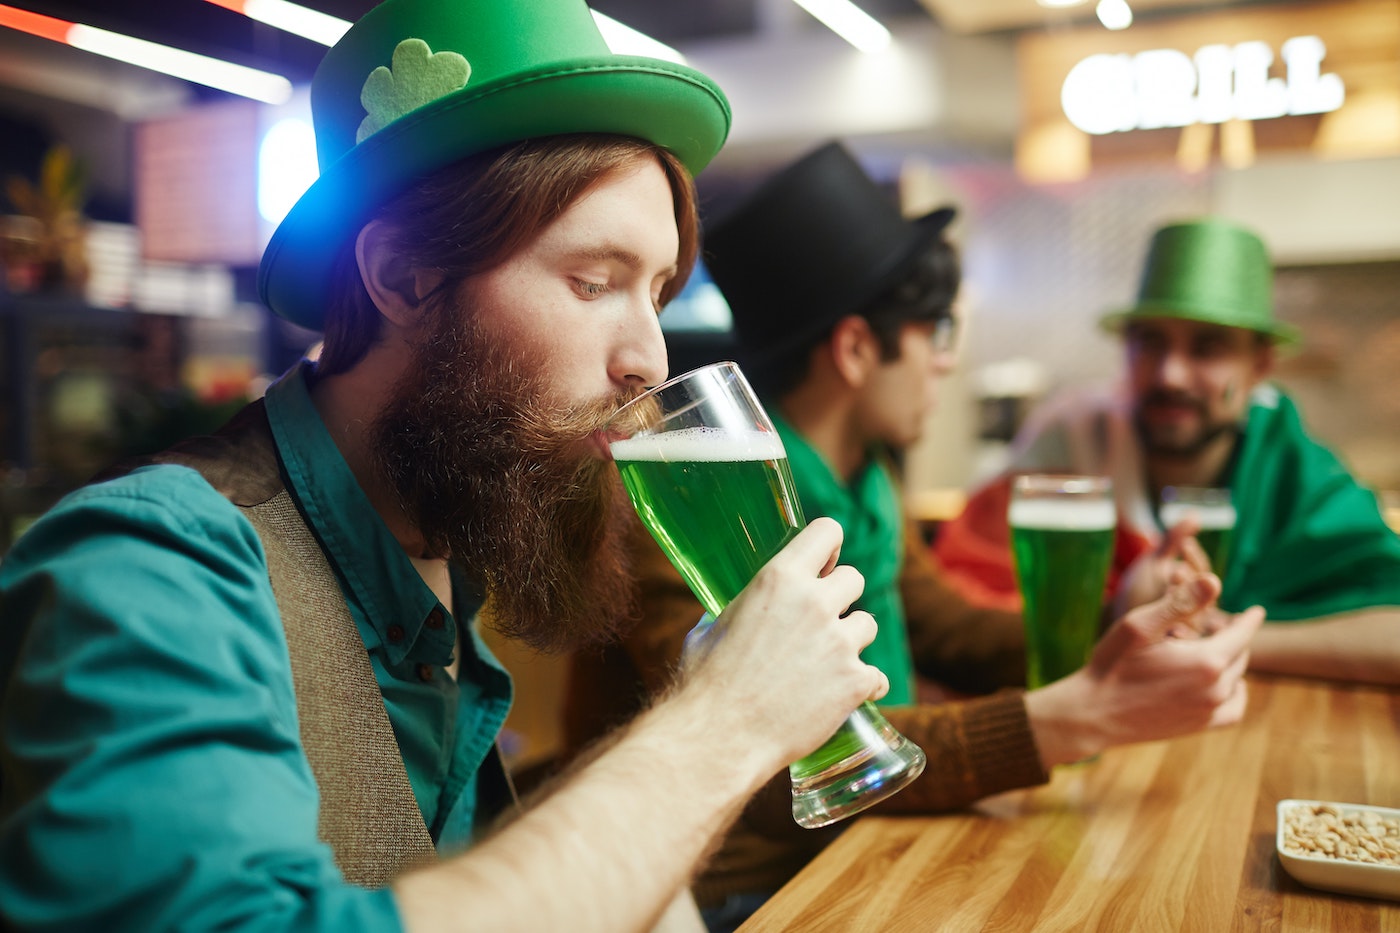 Top 8 U.S. Cities to Spend St. Patrick’s Day